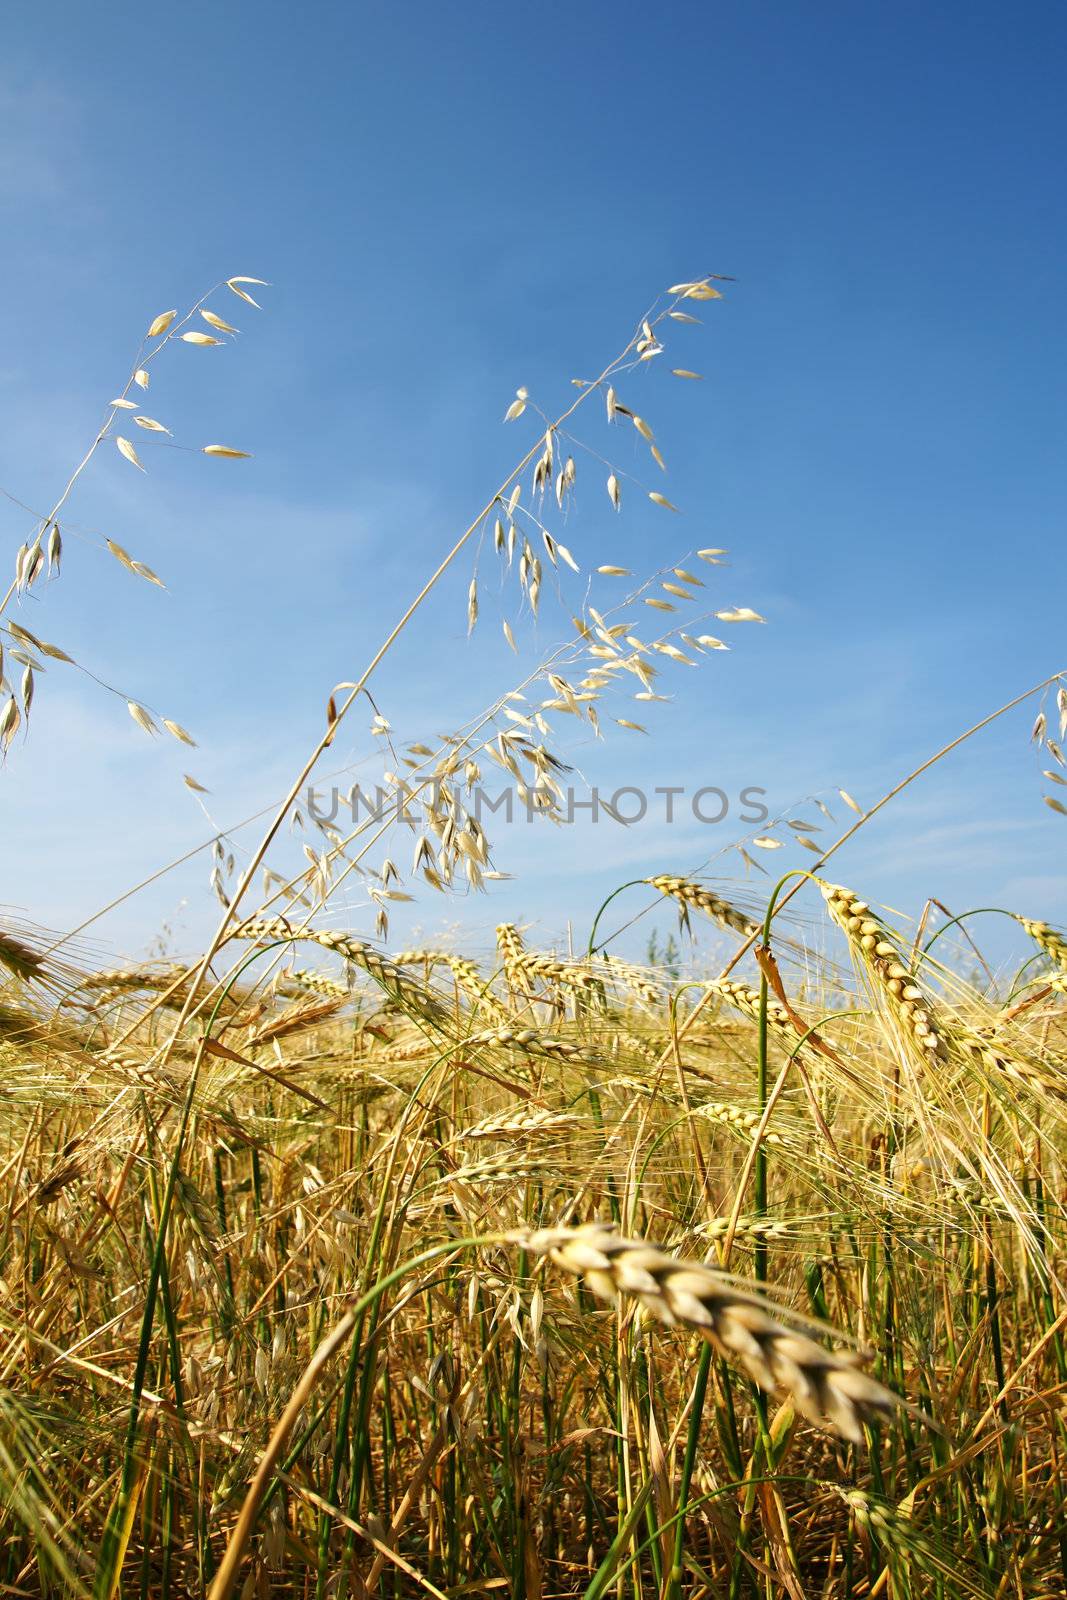 Vertical of a field of golden ripe barley with some oat growing amongst it, shot against bright blue sky with few diffused white clouds.